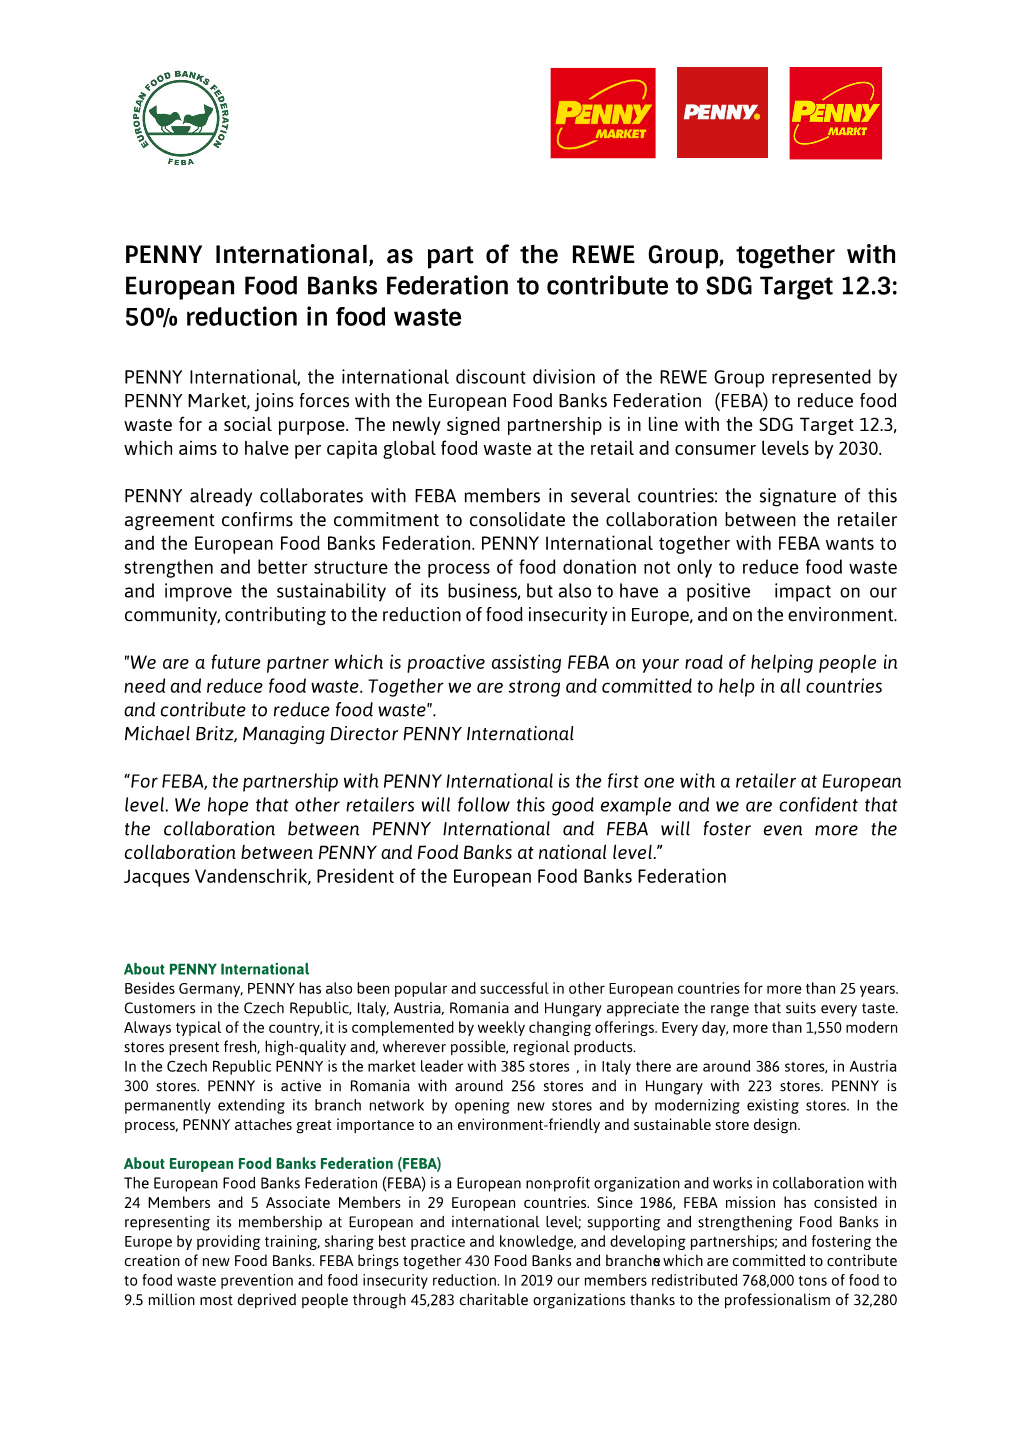 PENNY International, As Part of the REWE Group, Together with European Food Banks Federation to Contribute to SDG Target 12.3: 50% Reduction in Food Waste